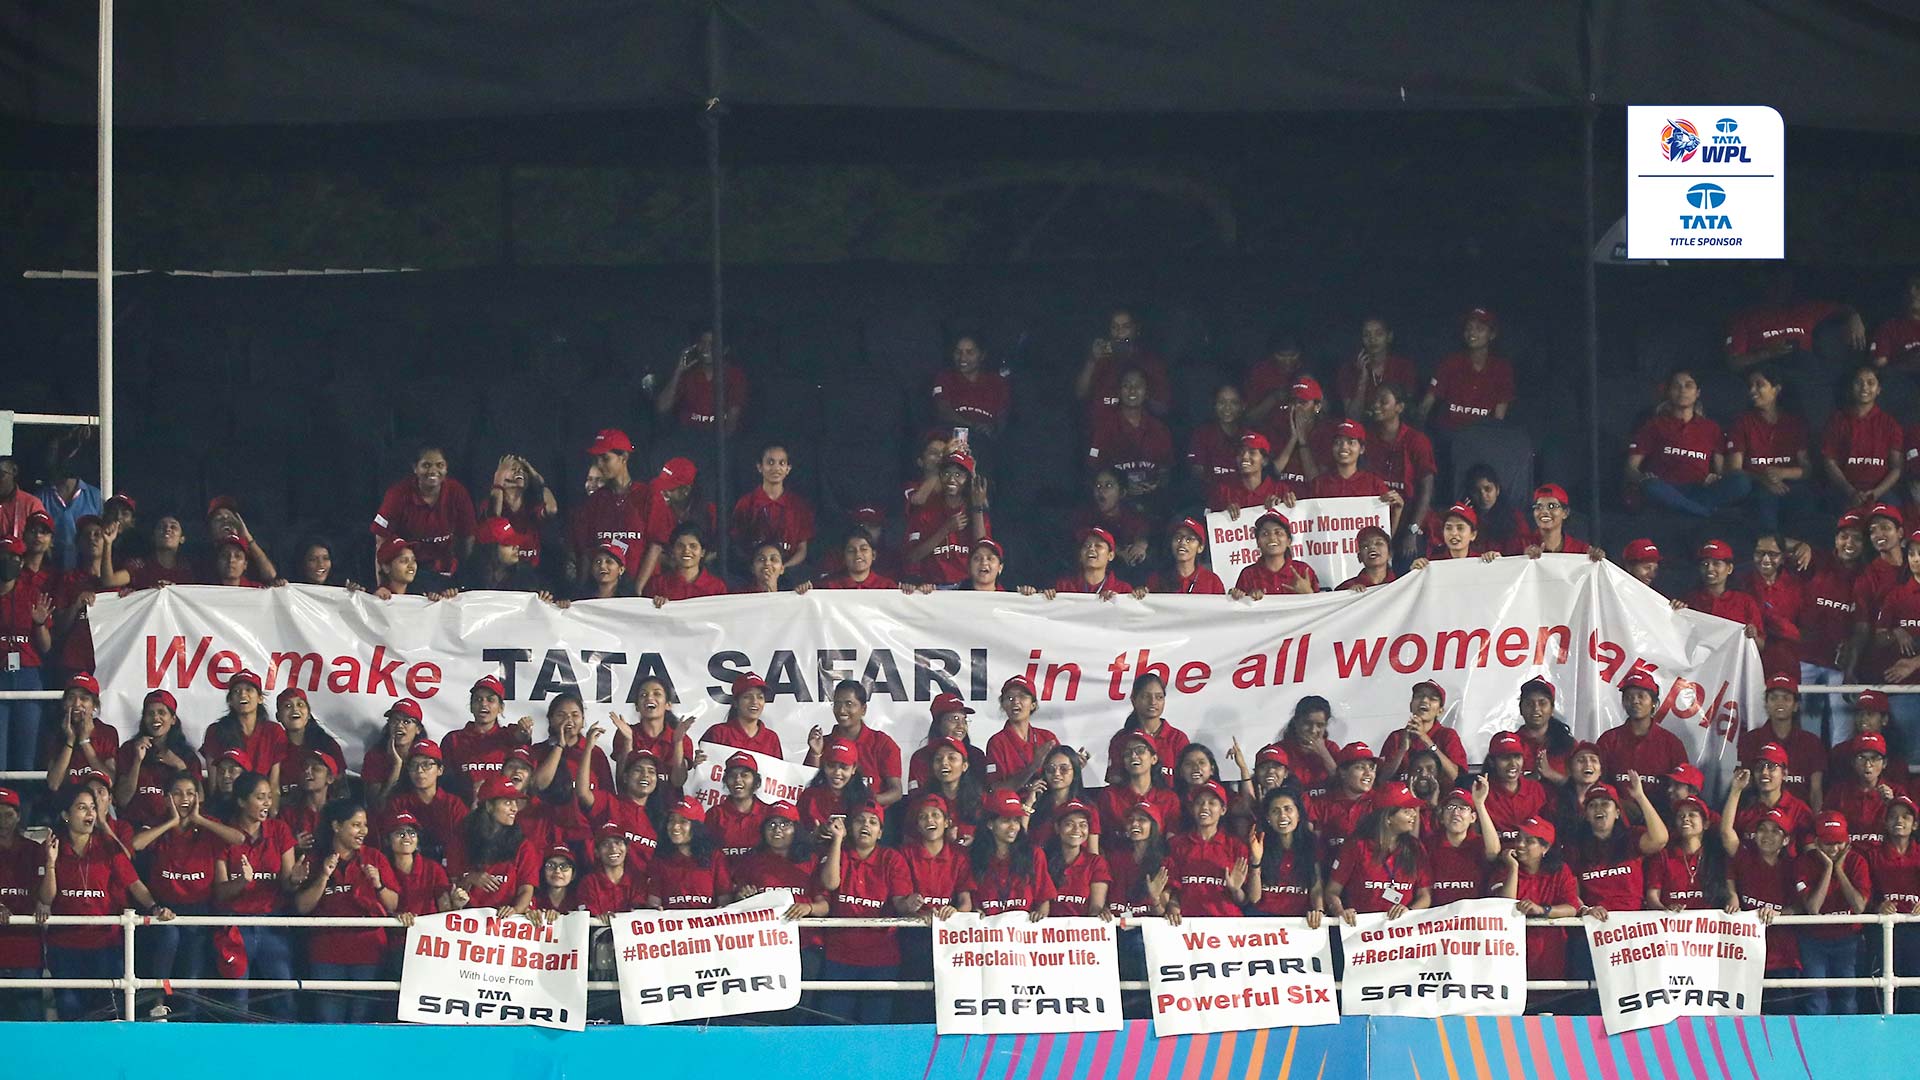 The Tata group is the title sponsor for the first Women's Premier League 